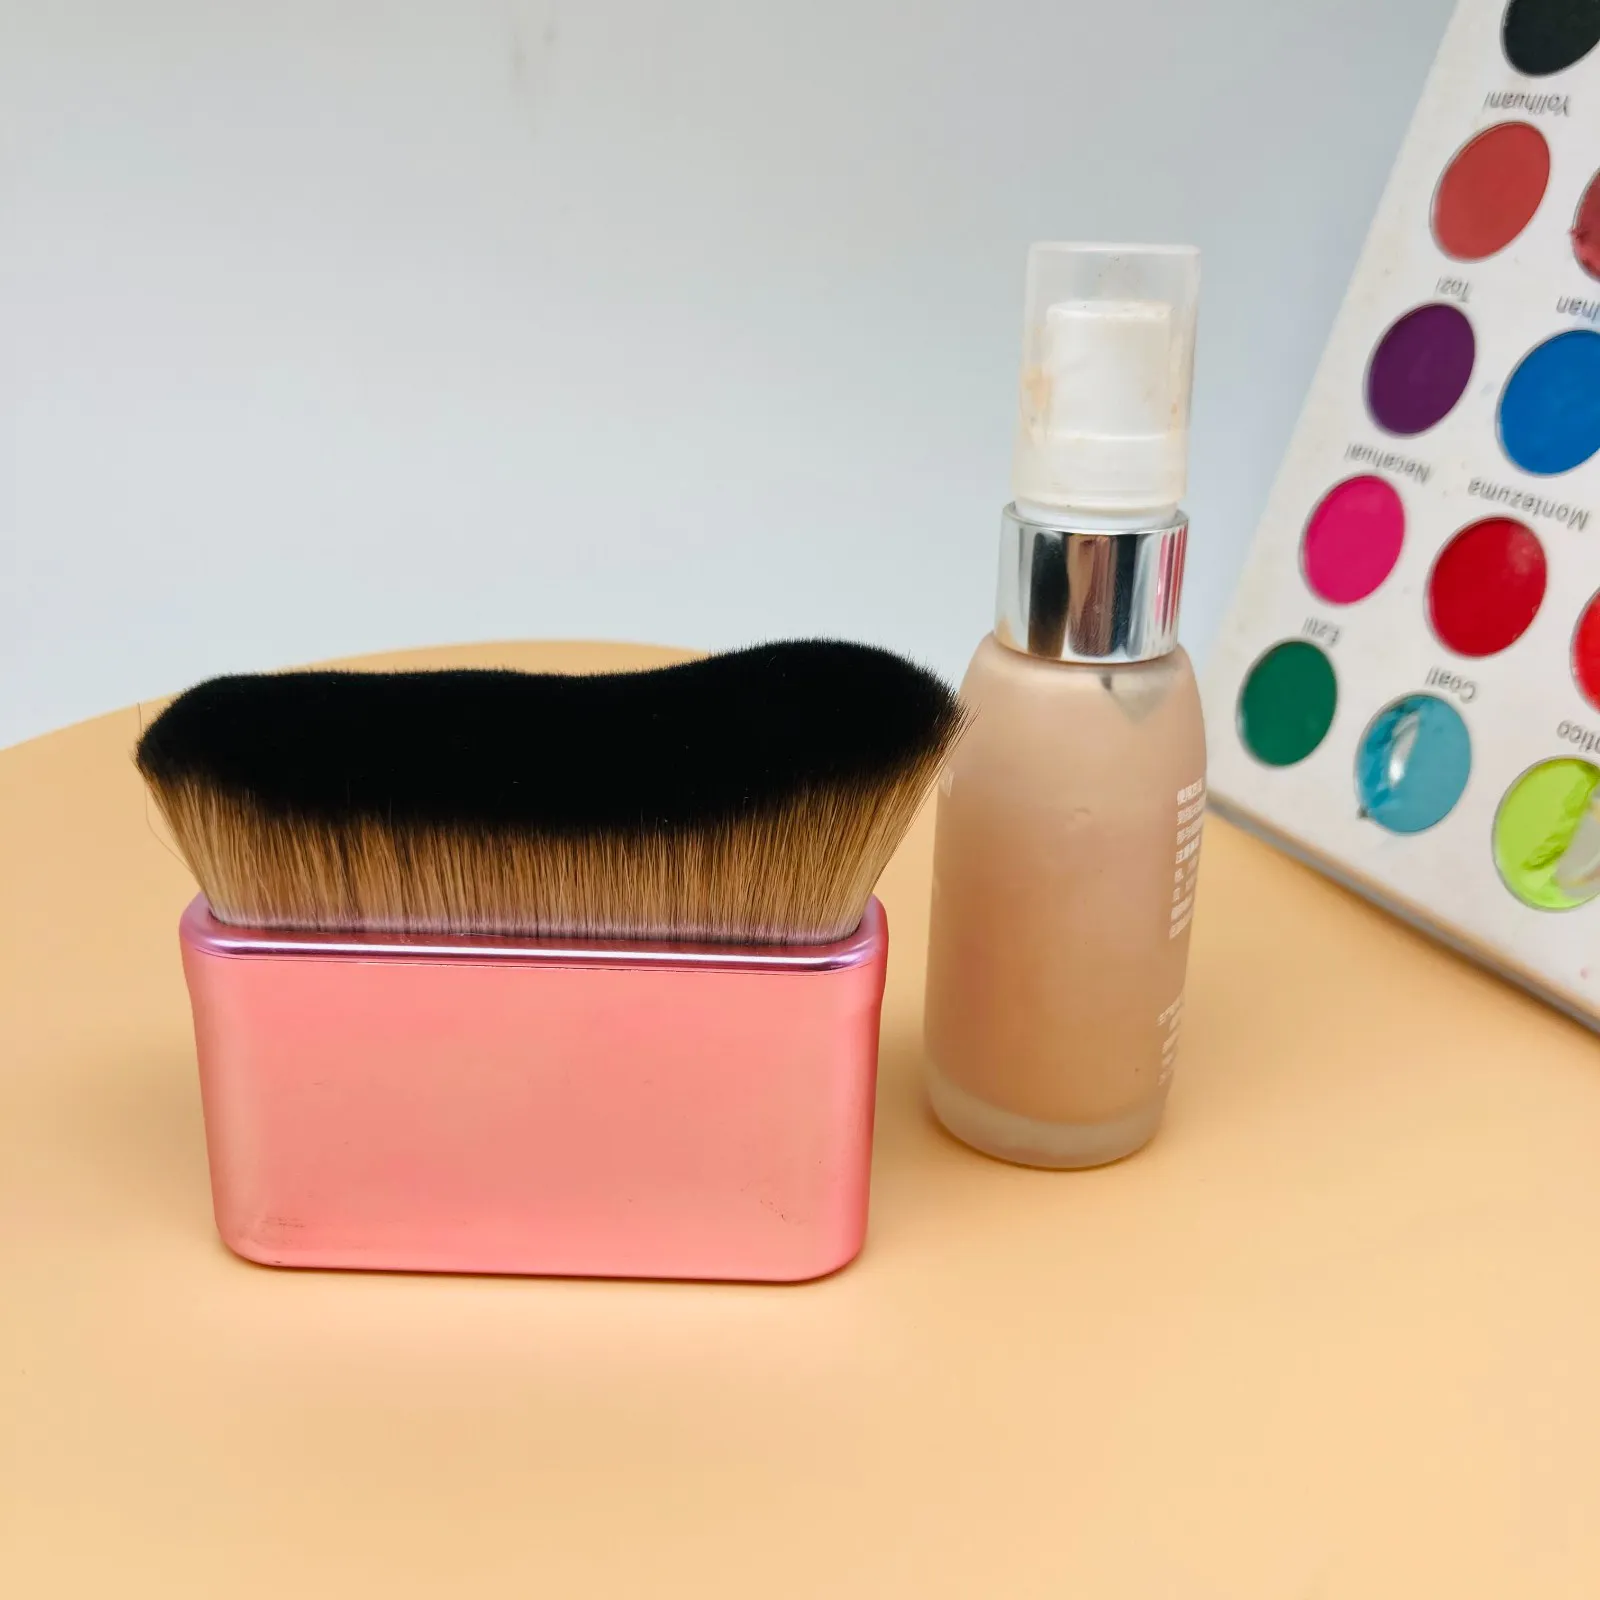 Suprabeauty best makeup brushes for beginners Suppliers for beauty